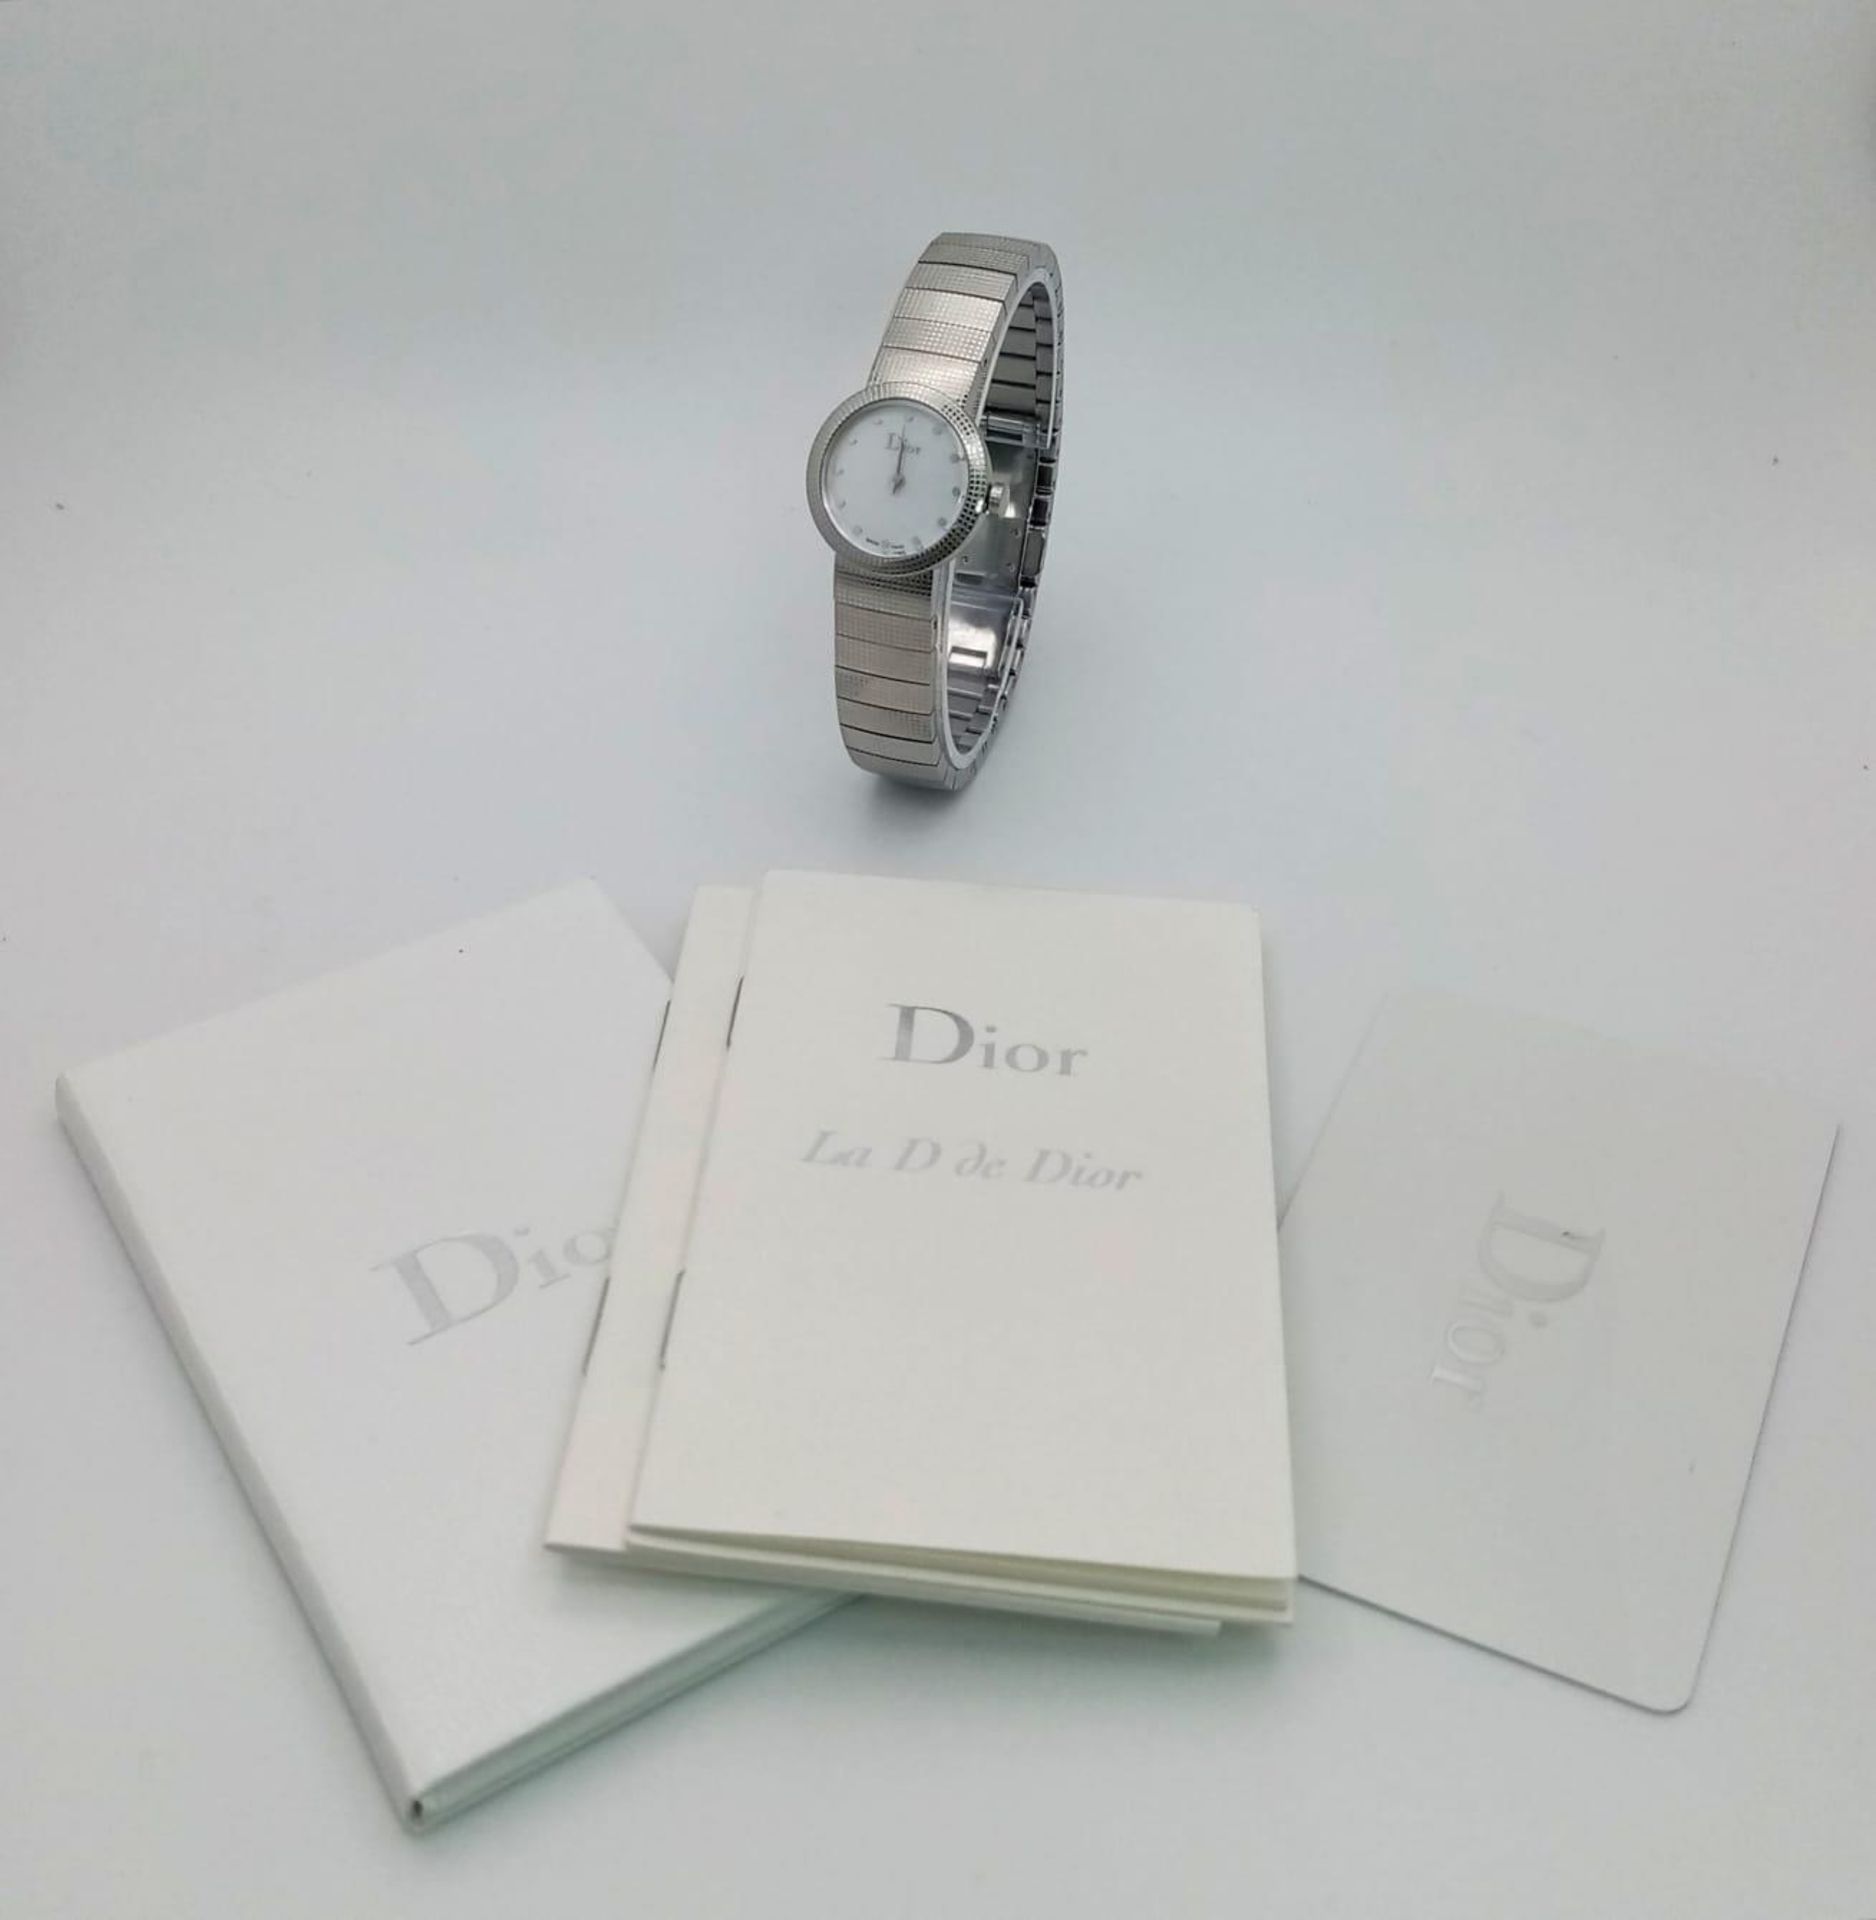 A Designer Christian Dior Quartz Ladies Watch. Stainless steel bracelet and case - 23mm. White dial. - Image 10 of 10